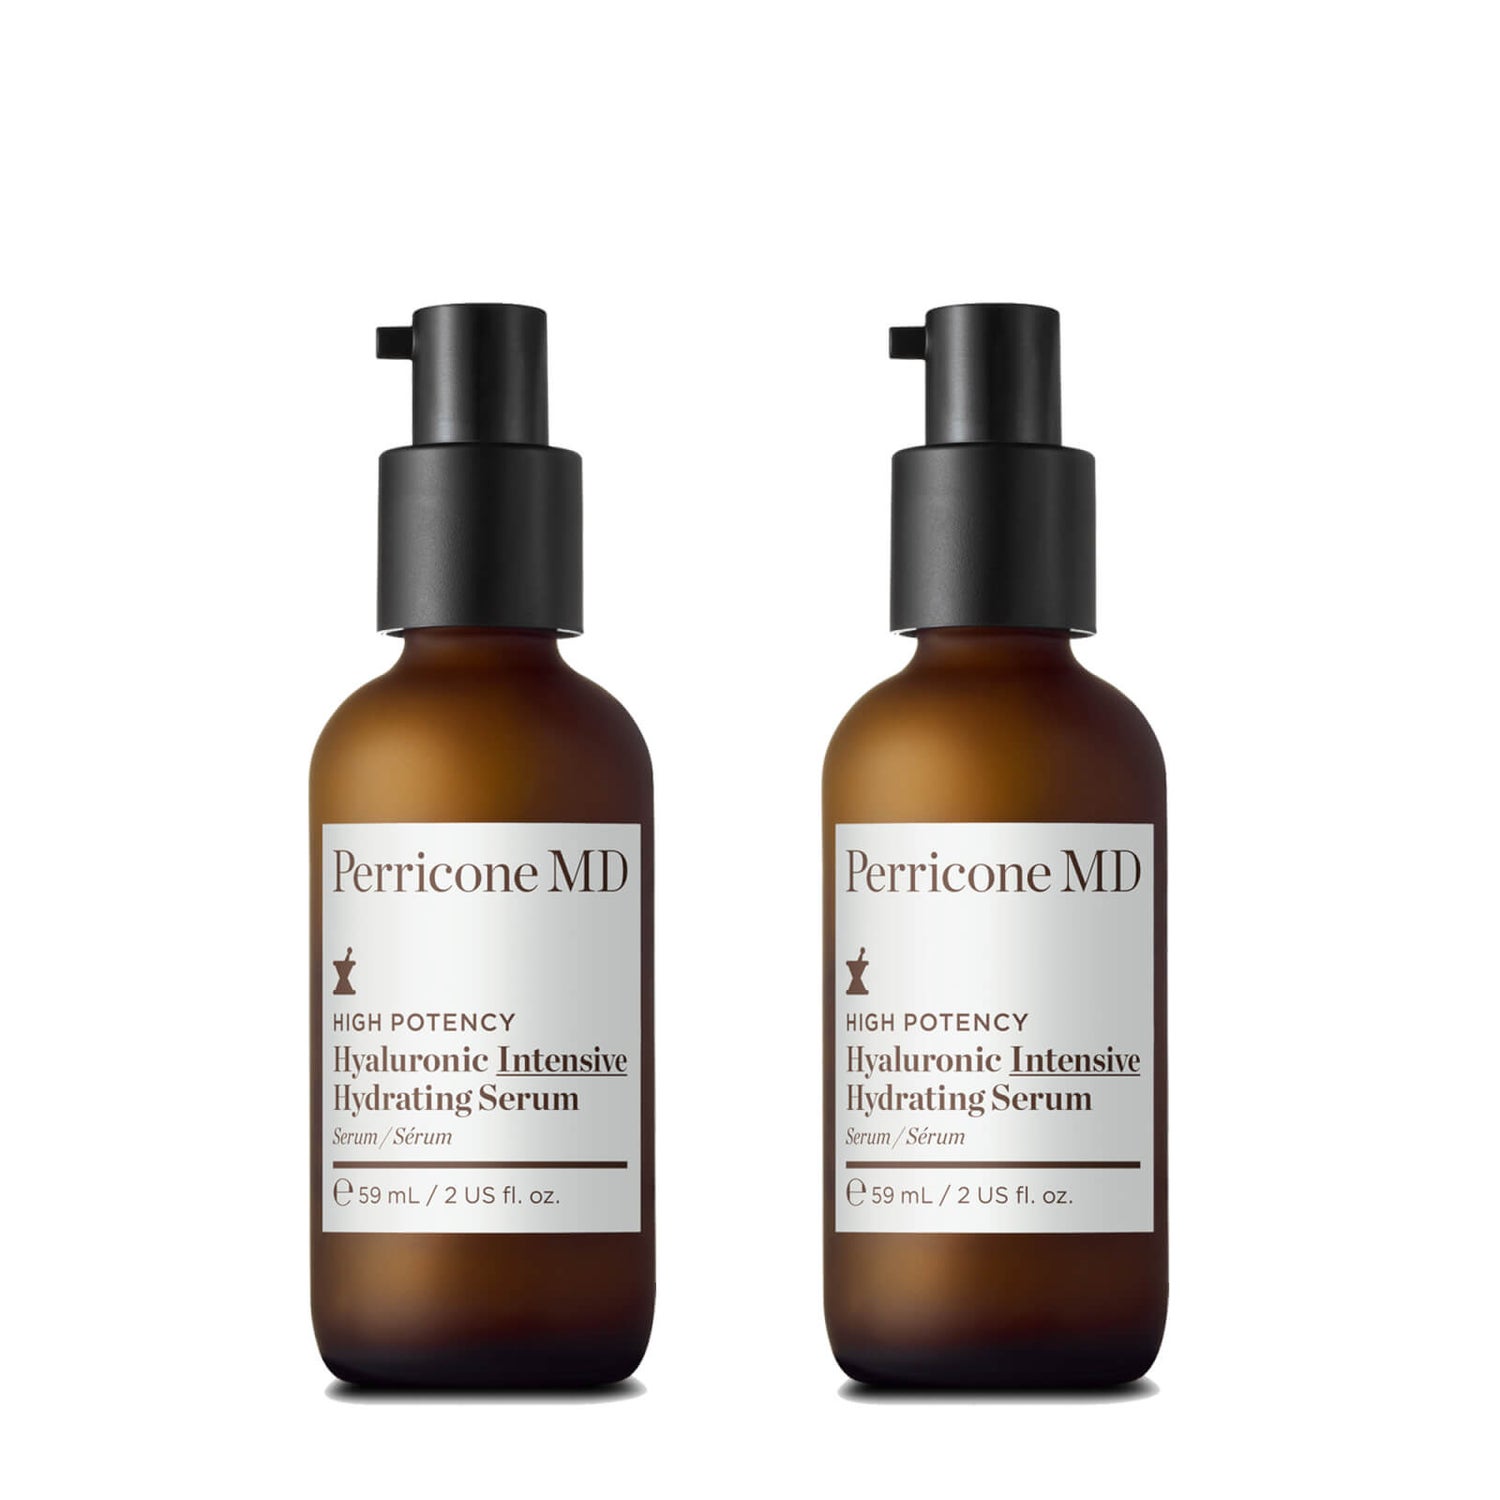 High Potency Hyaluronic Intensive Hydrating Serum Duo